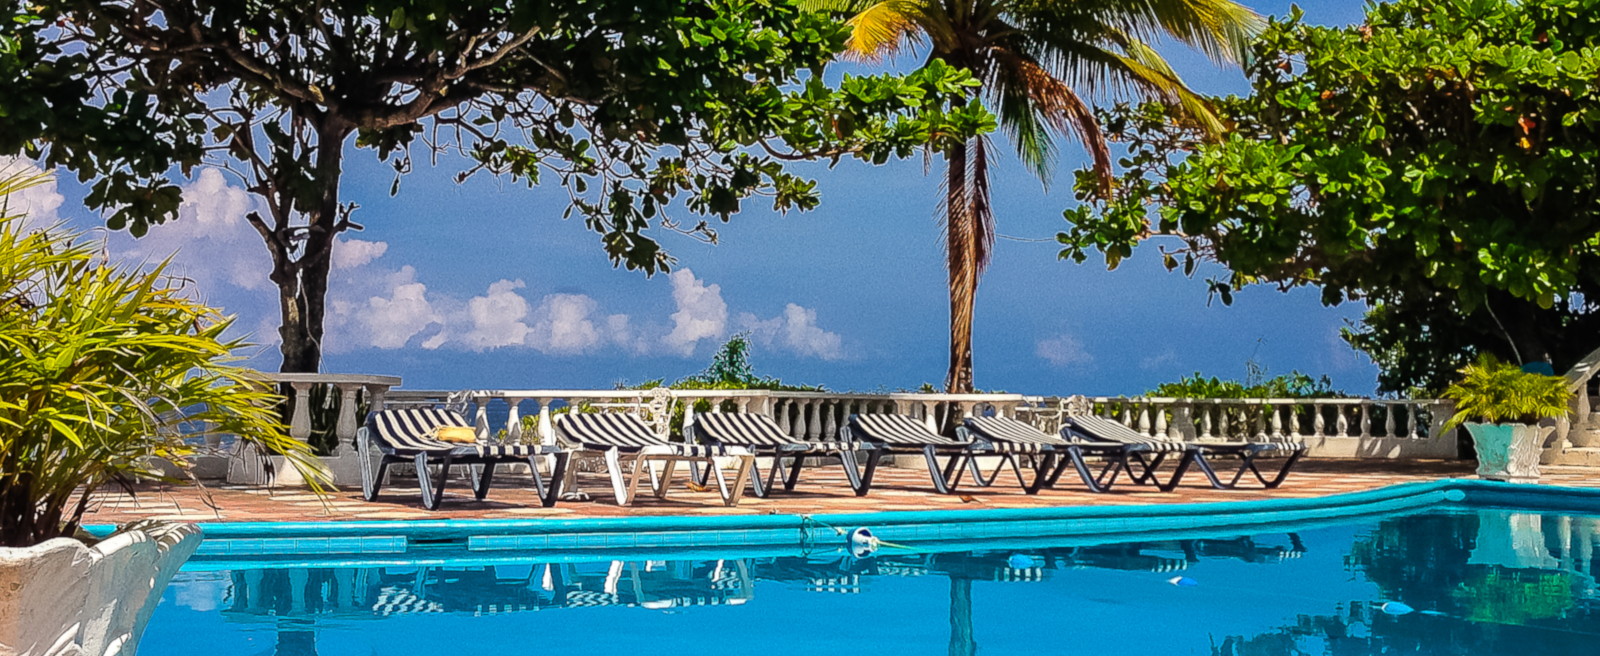 Best Hotels & Resorts located near Dunn's River Falls